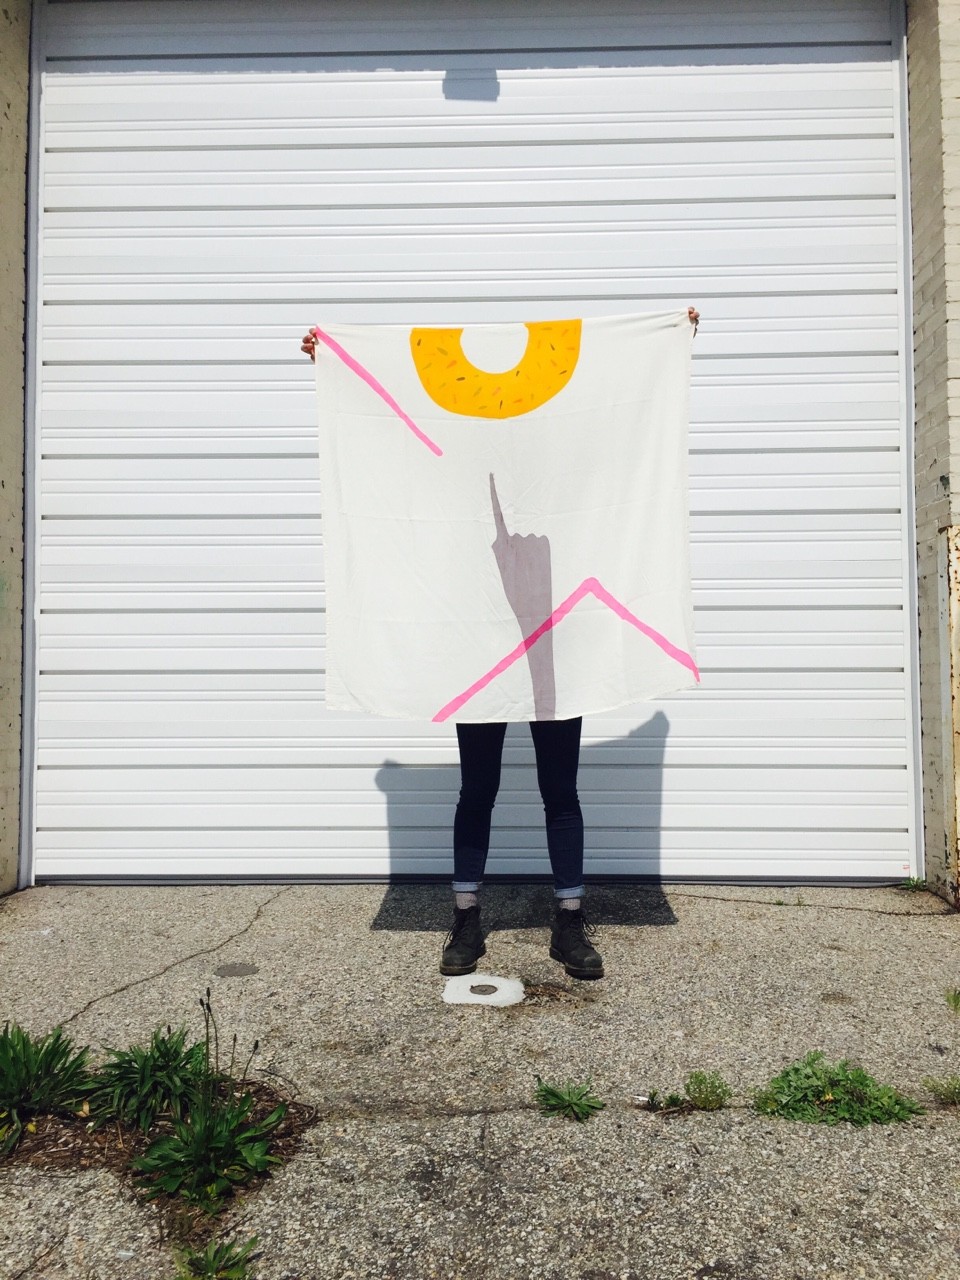 Model holding scarf against wall. Design includes a grey hand pointing to a yellow half circle.